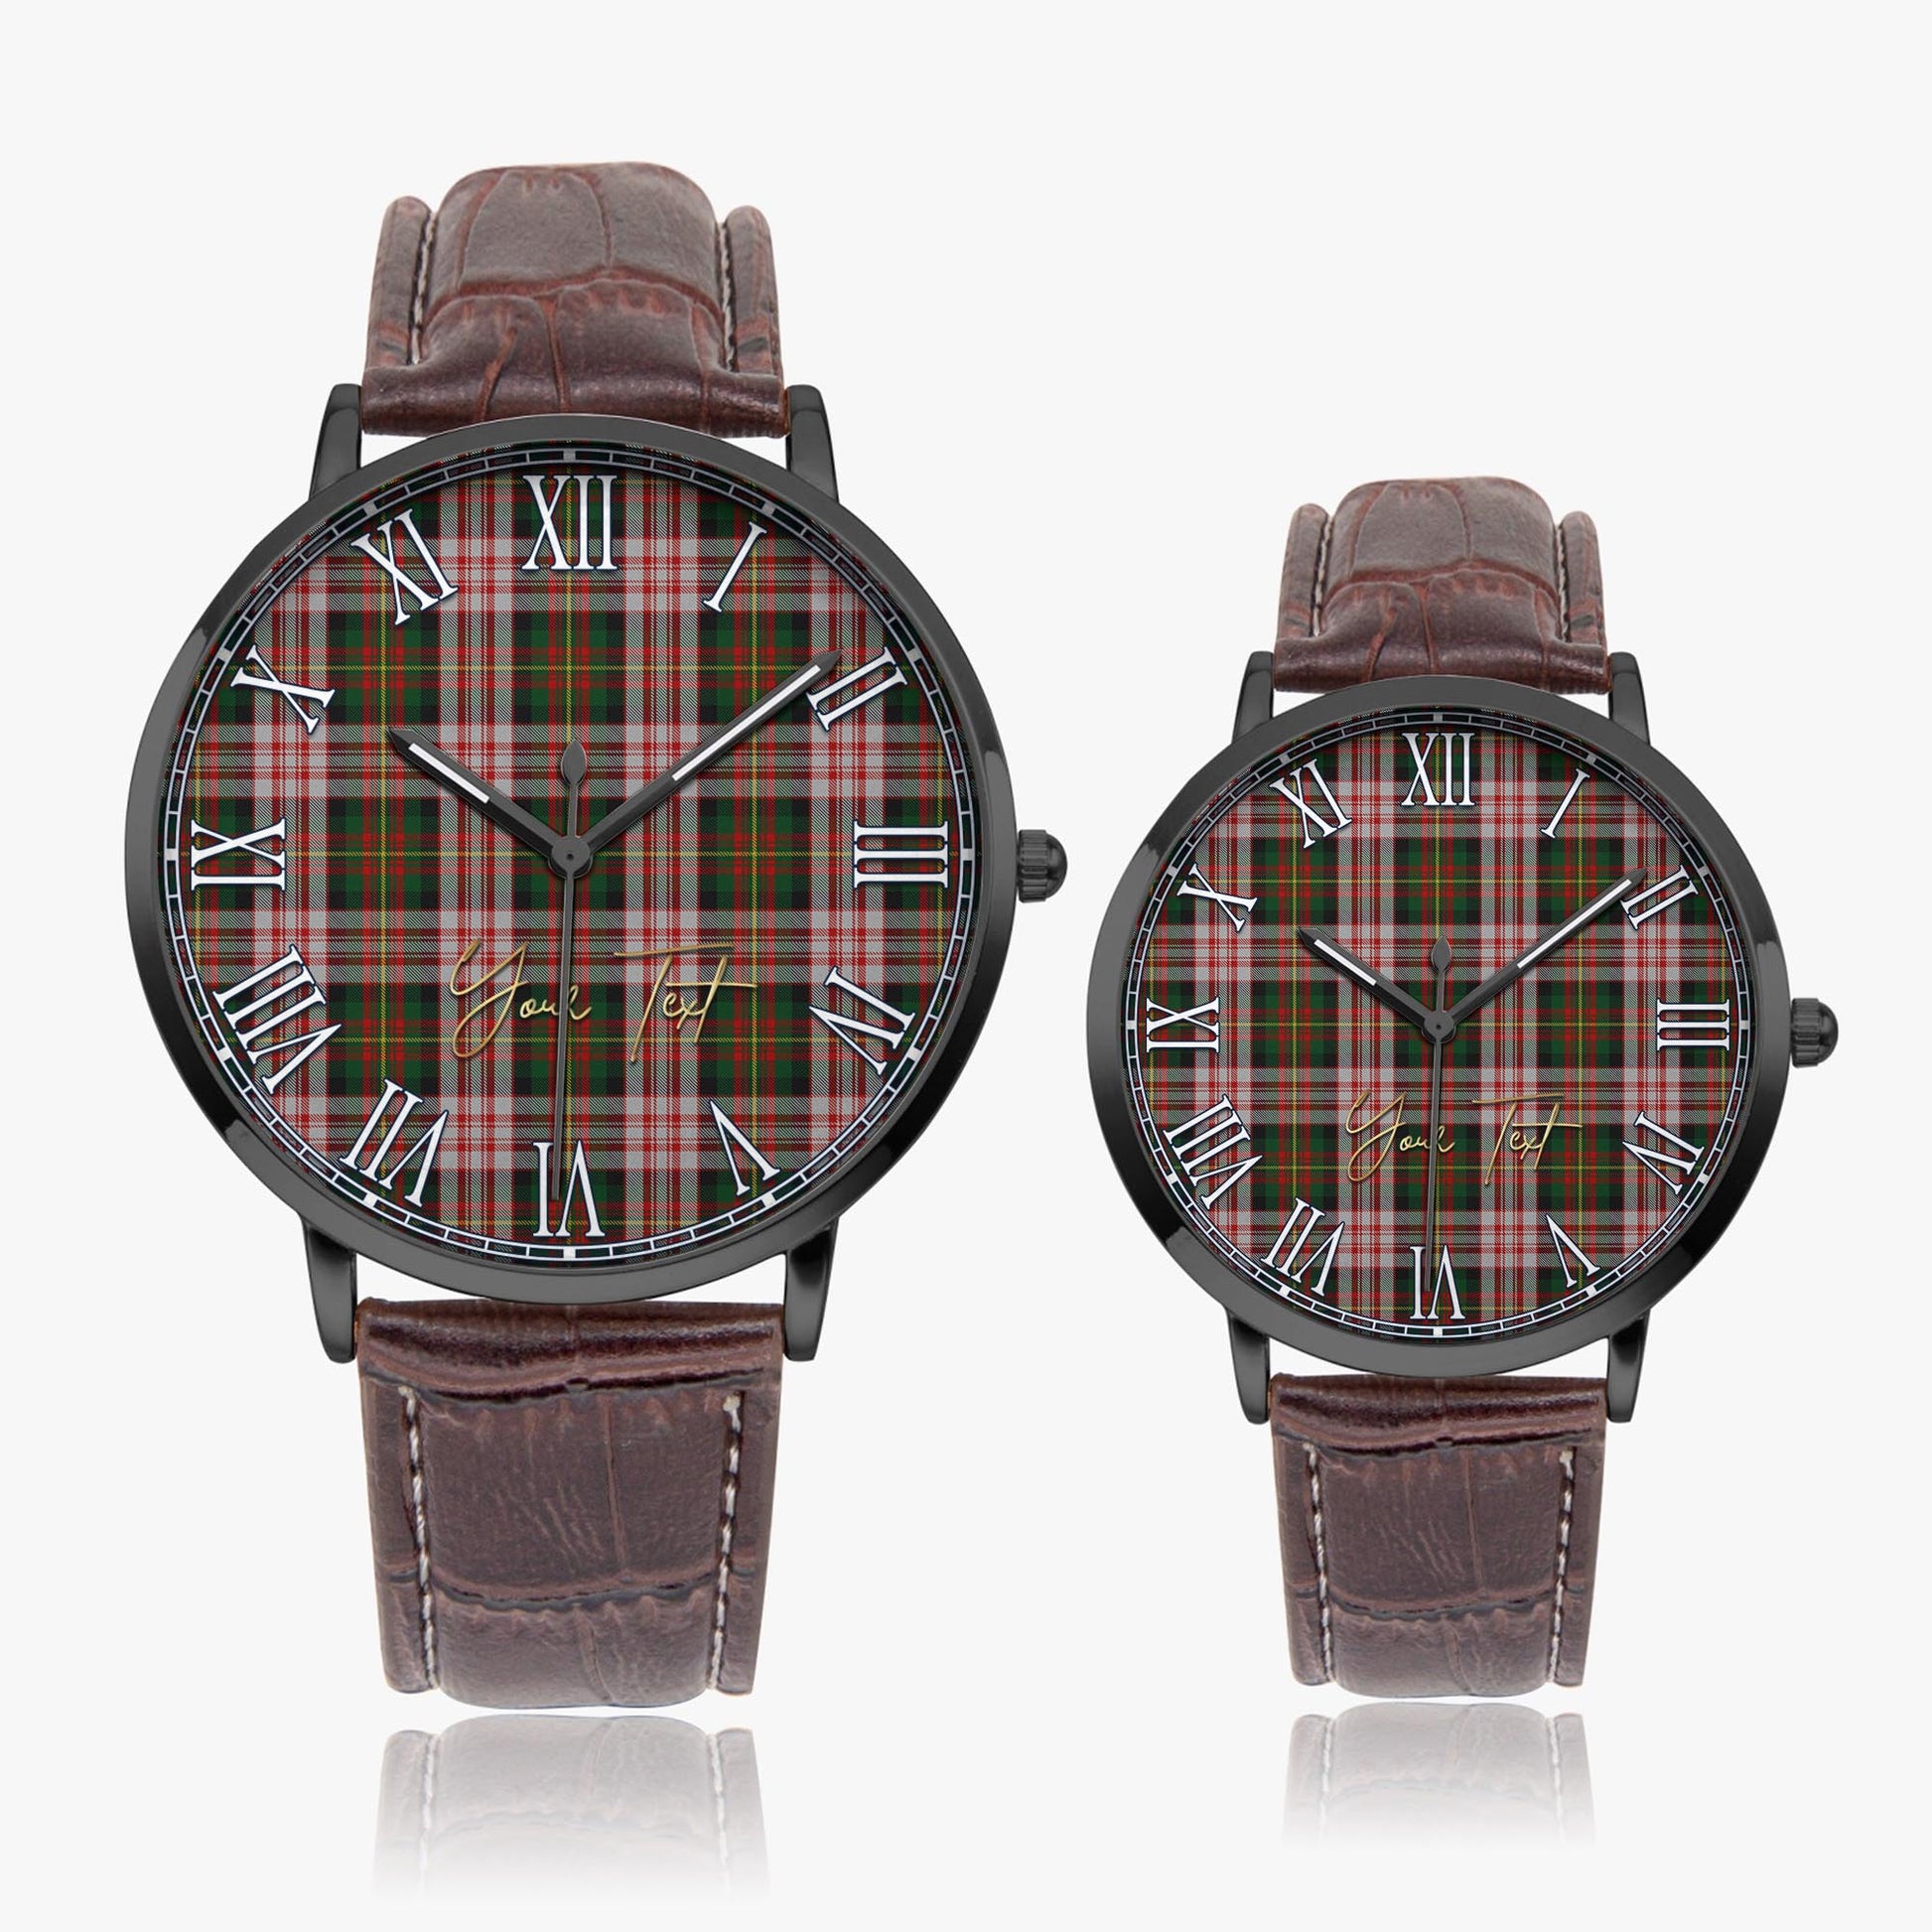 Carnegie Dress Tartan Personalized Your Text Leather Trap Quartz Watch Ultra Thin Black Case With Brown Leather Strap - Tartanvibesclothing